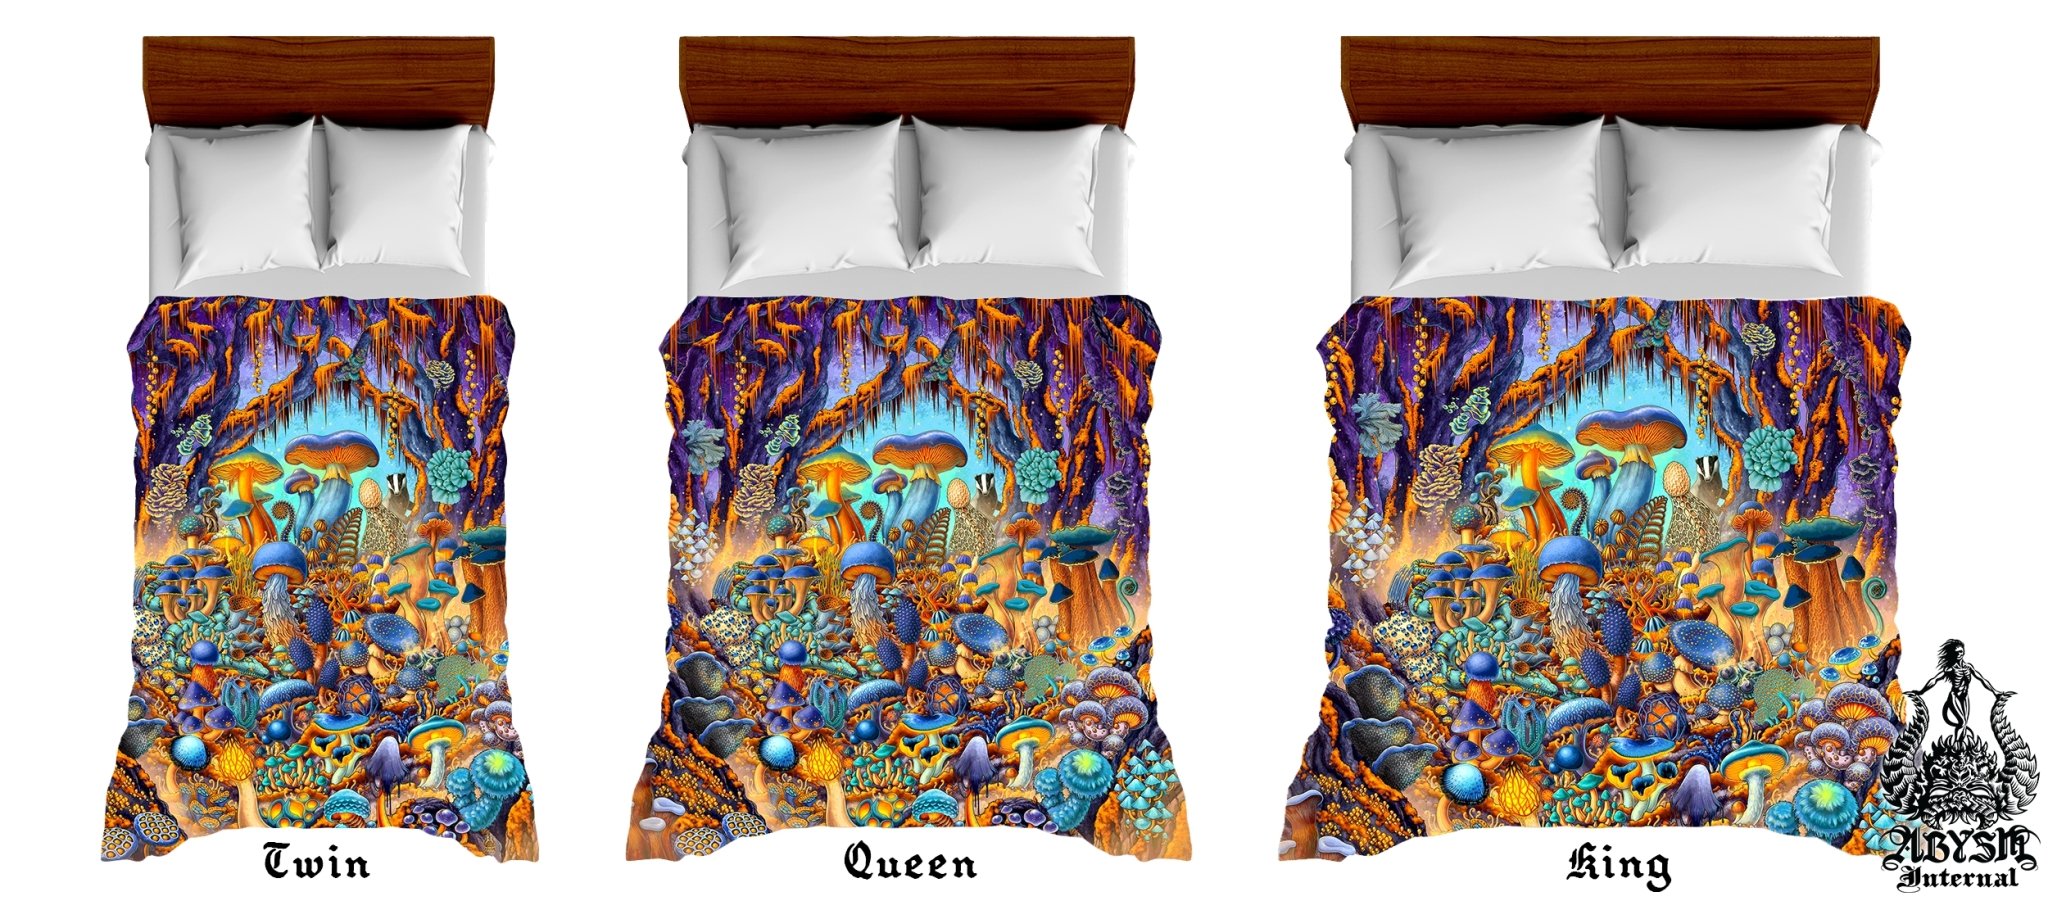 Mushrooms Bedding Set, Comforter and Duvet, Kids Fantasy Bed Cover, Bedroom Decor, King, Queen and Twin Size - Magic Shrooms, Cyan and Gold - Abysm Internal